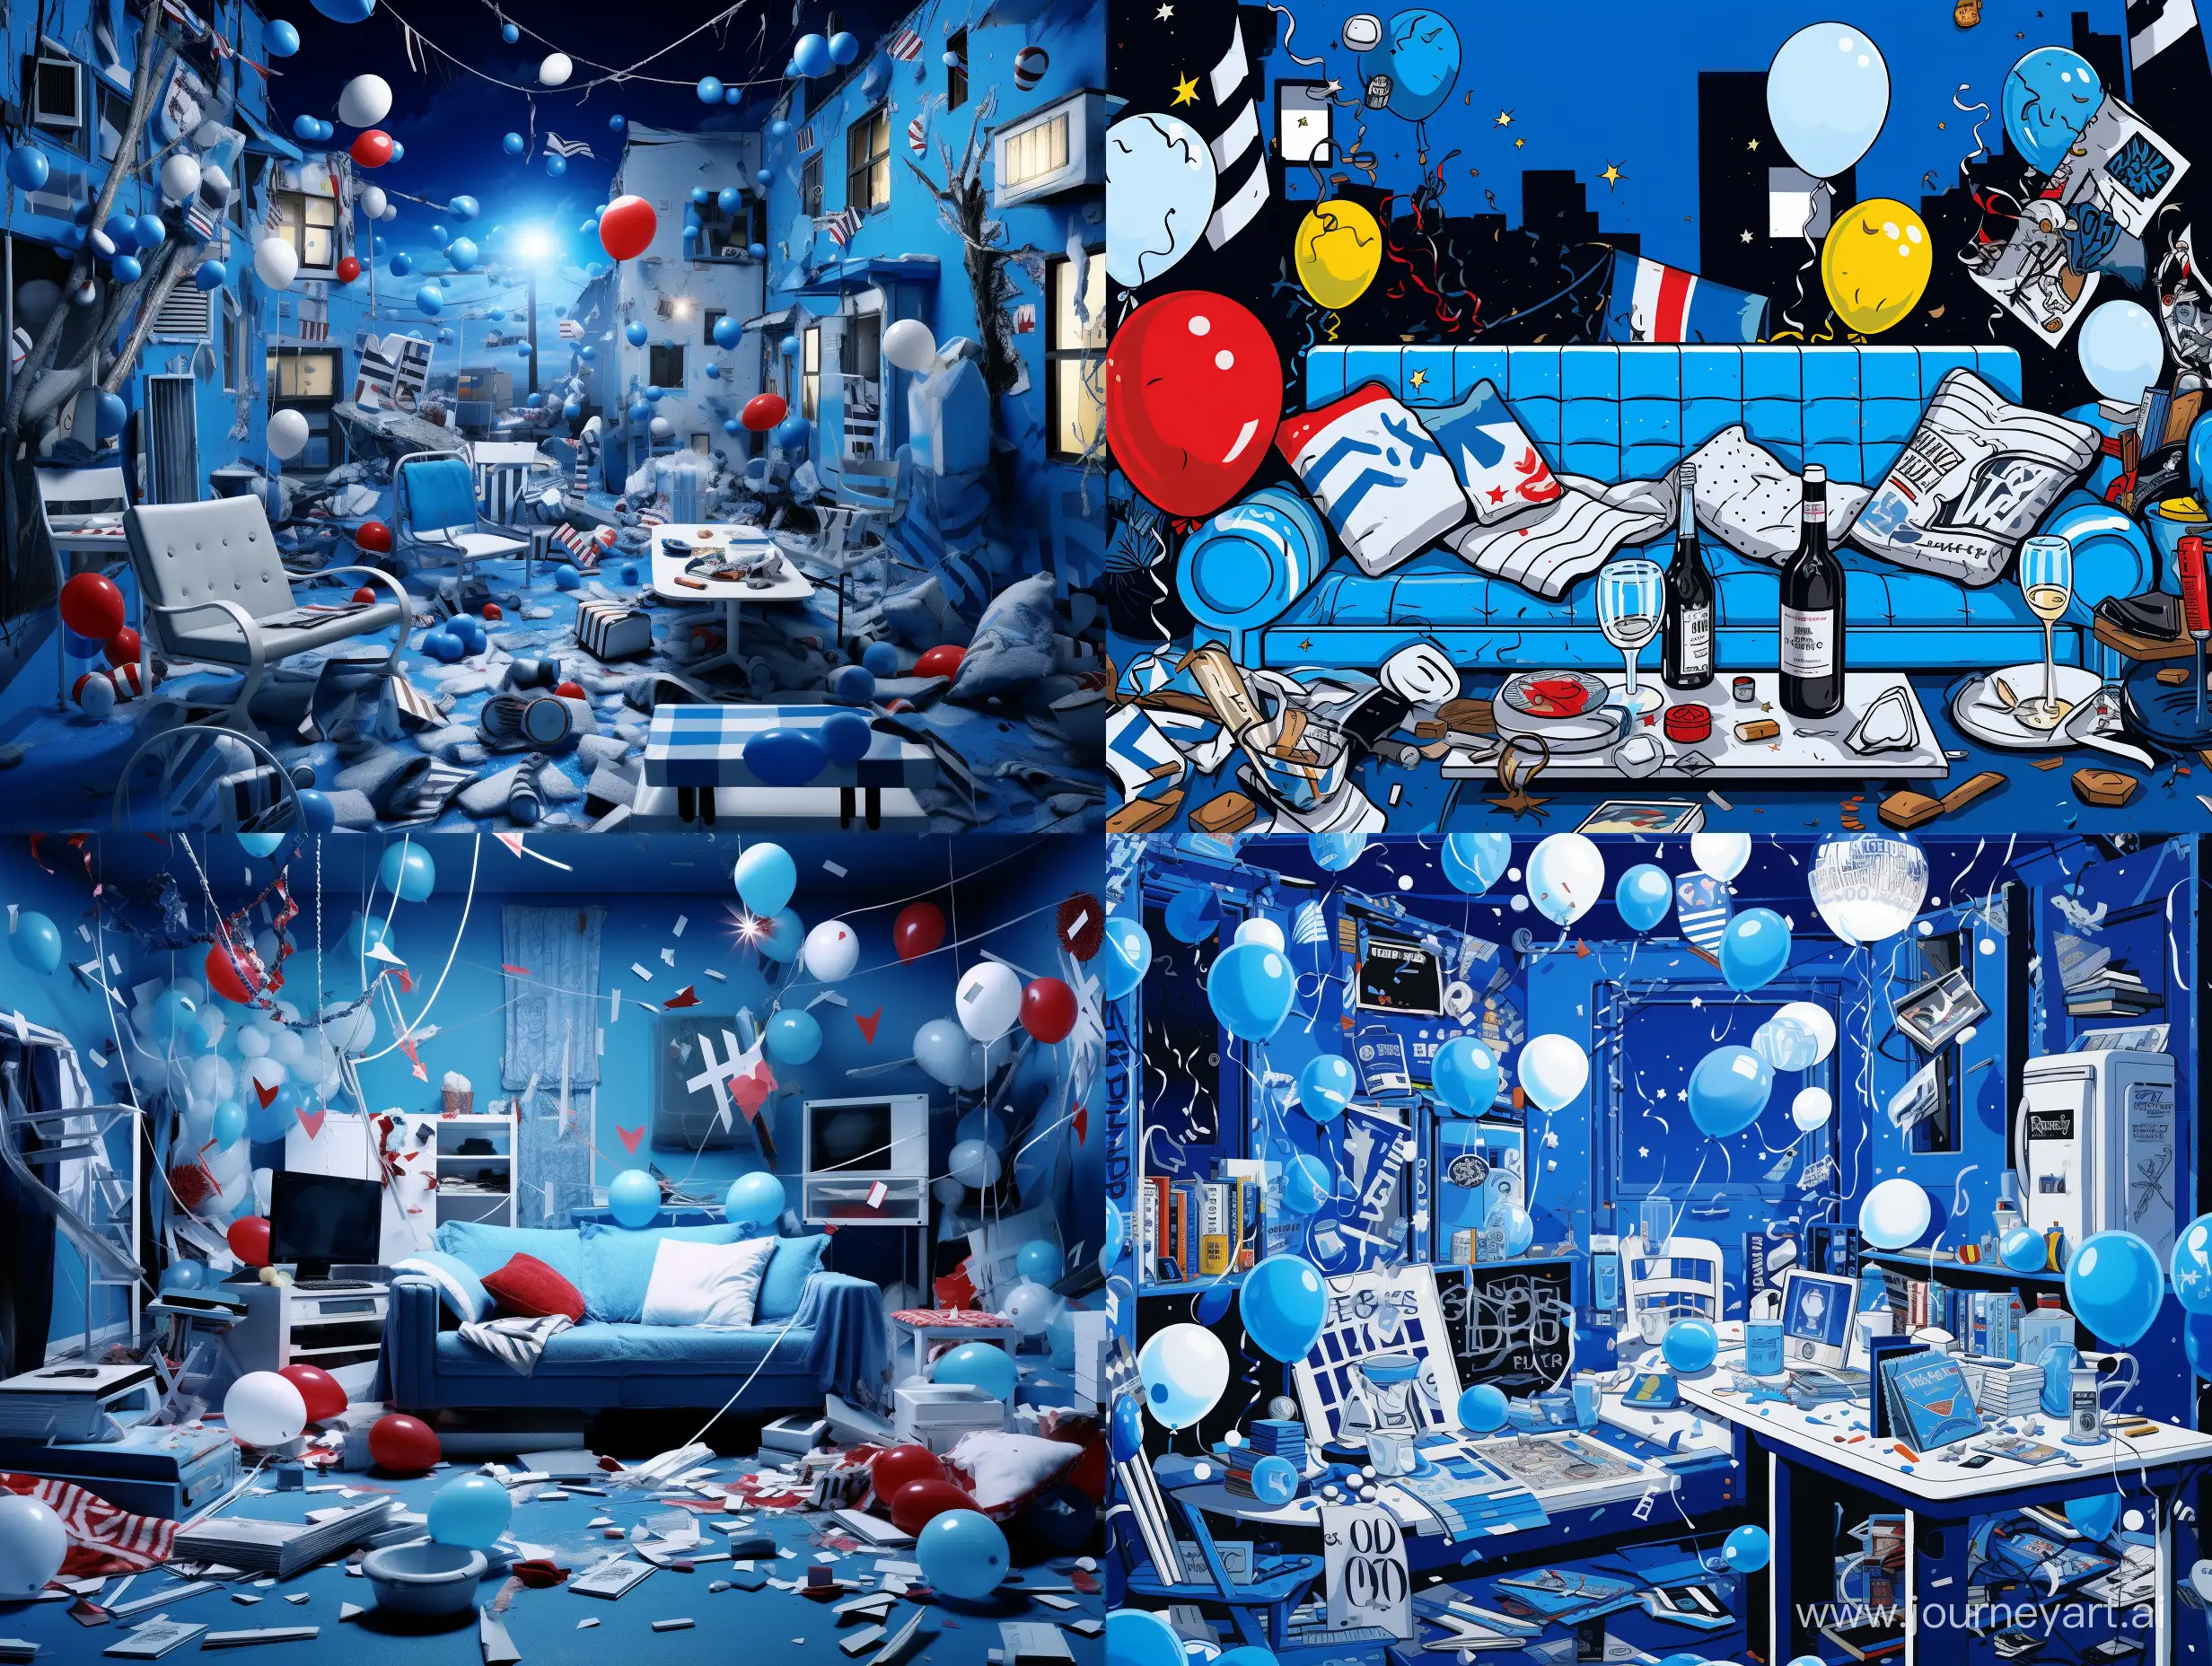 A night student party, in the style of the 90s, called "Lawlessness", scattered things everywhere, white and blue background